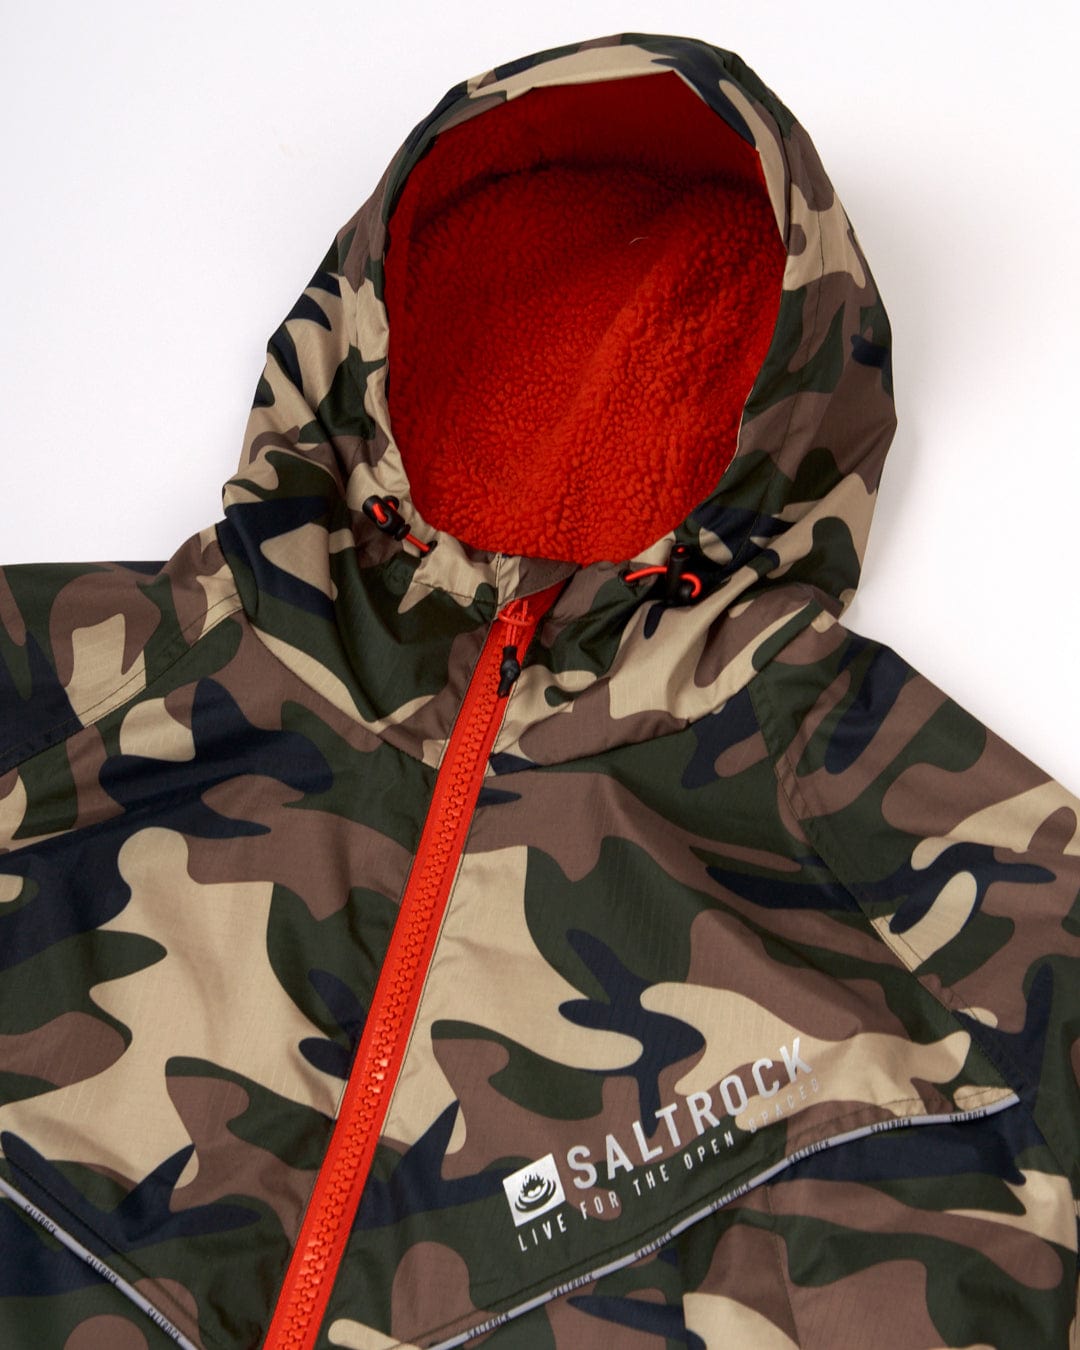 Saltrock's Recycled Four Seasons Changing Robe - Brown Camo with a red-lined hood and orange zipper, made from recycled material.